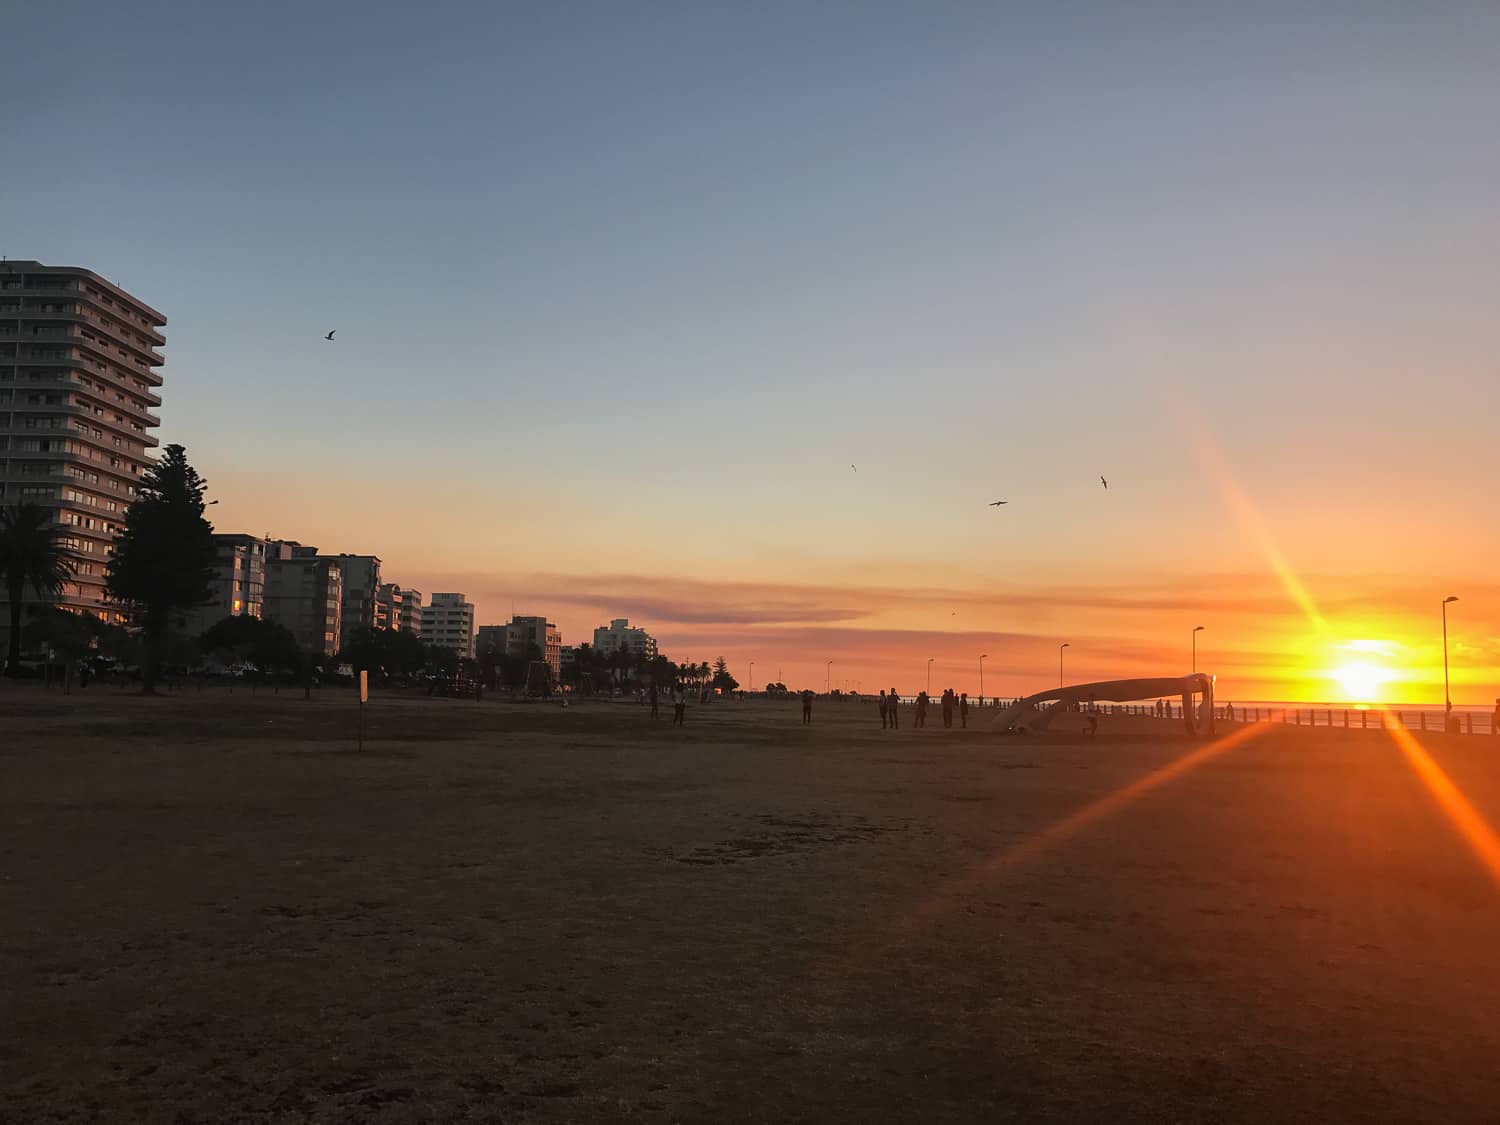 The Sea Point Promenade at sunset - a classic Cape Town experience